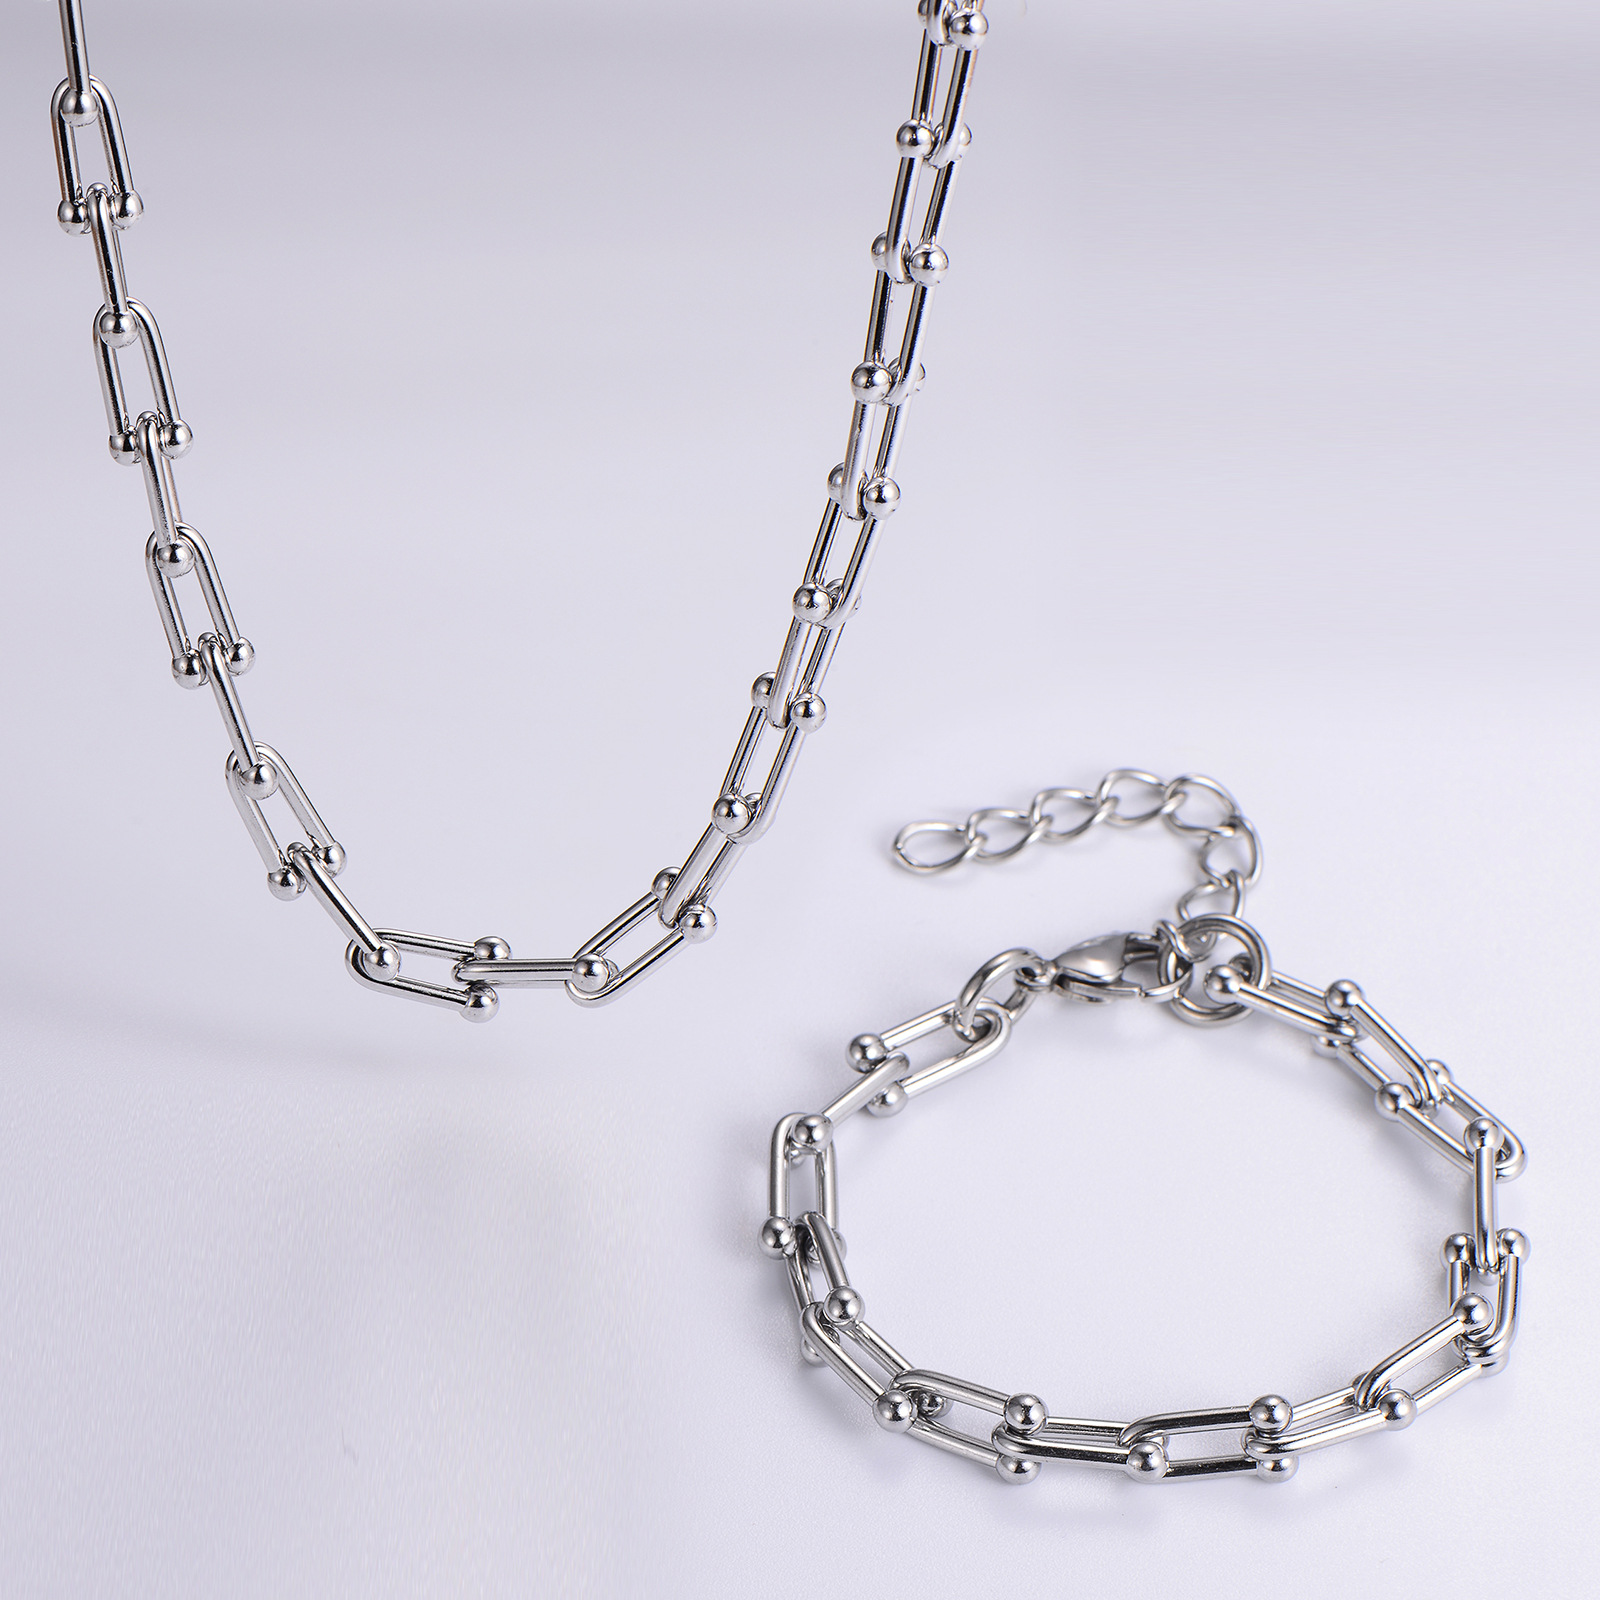 3:Steel bracelets and necklaces